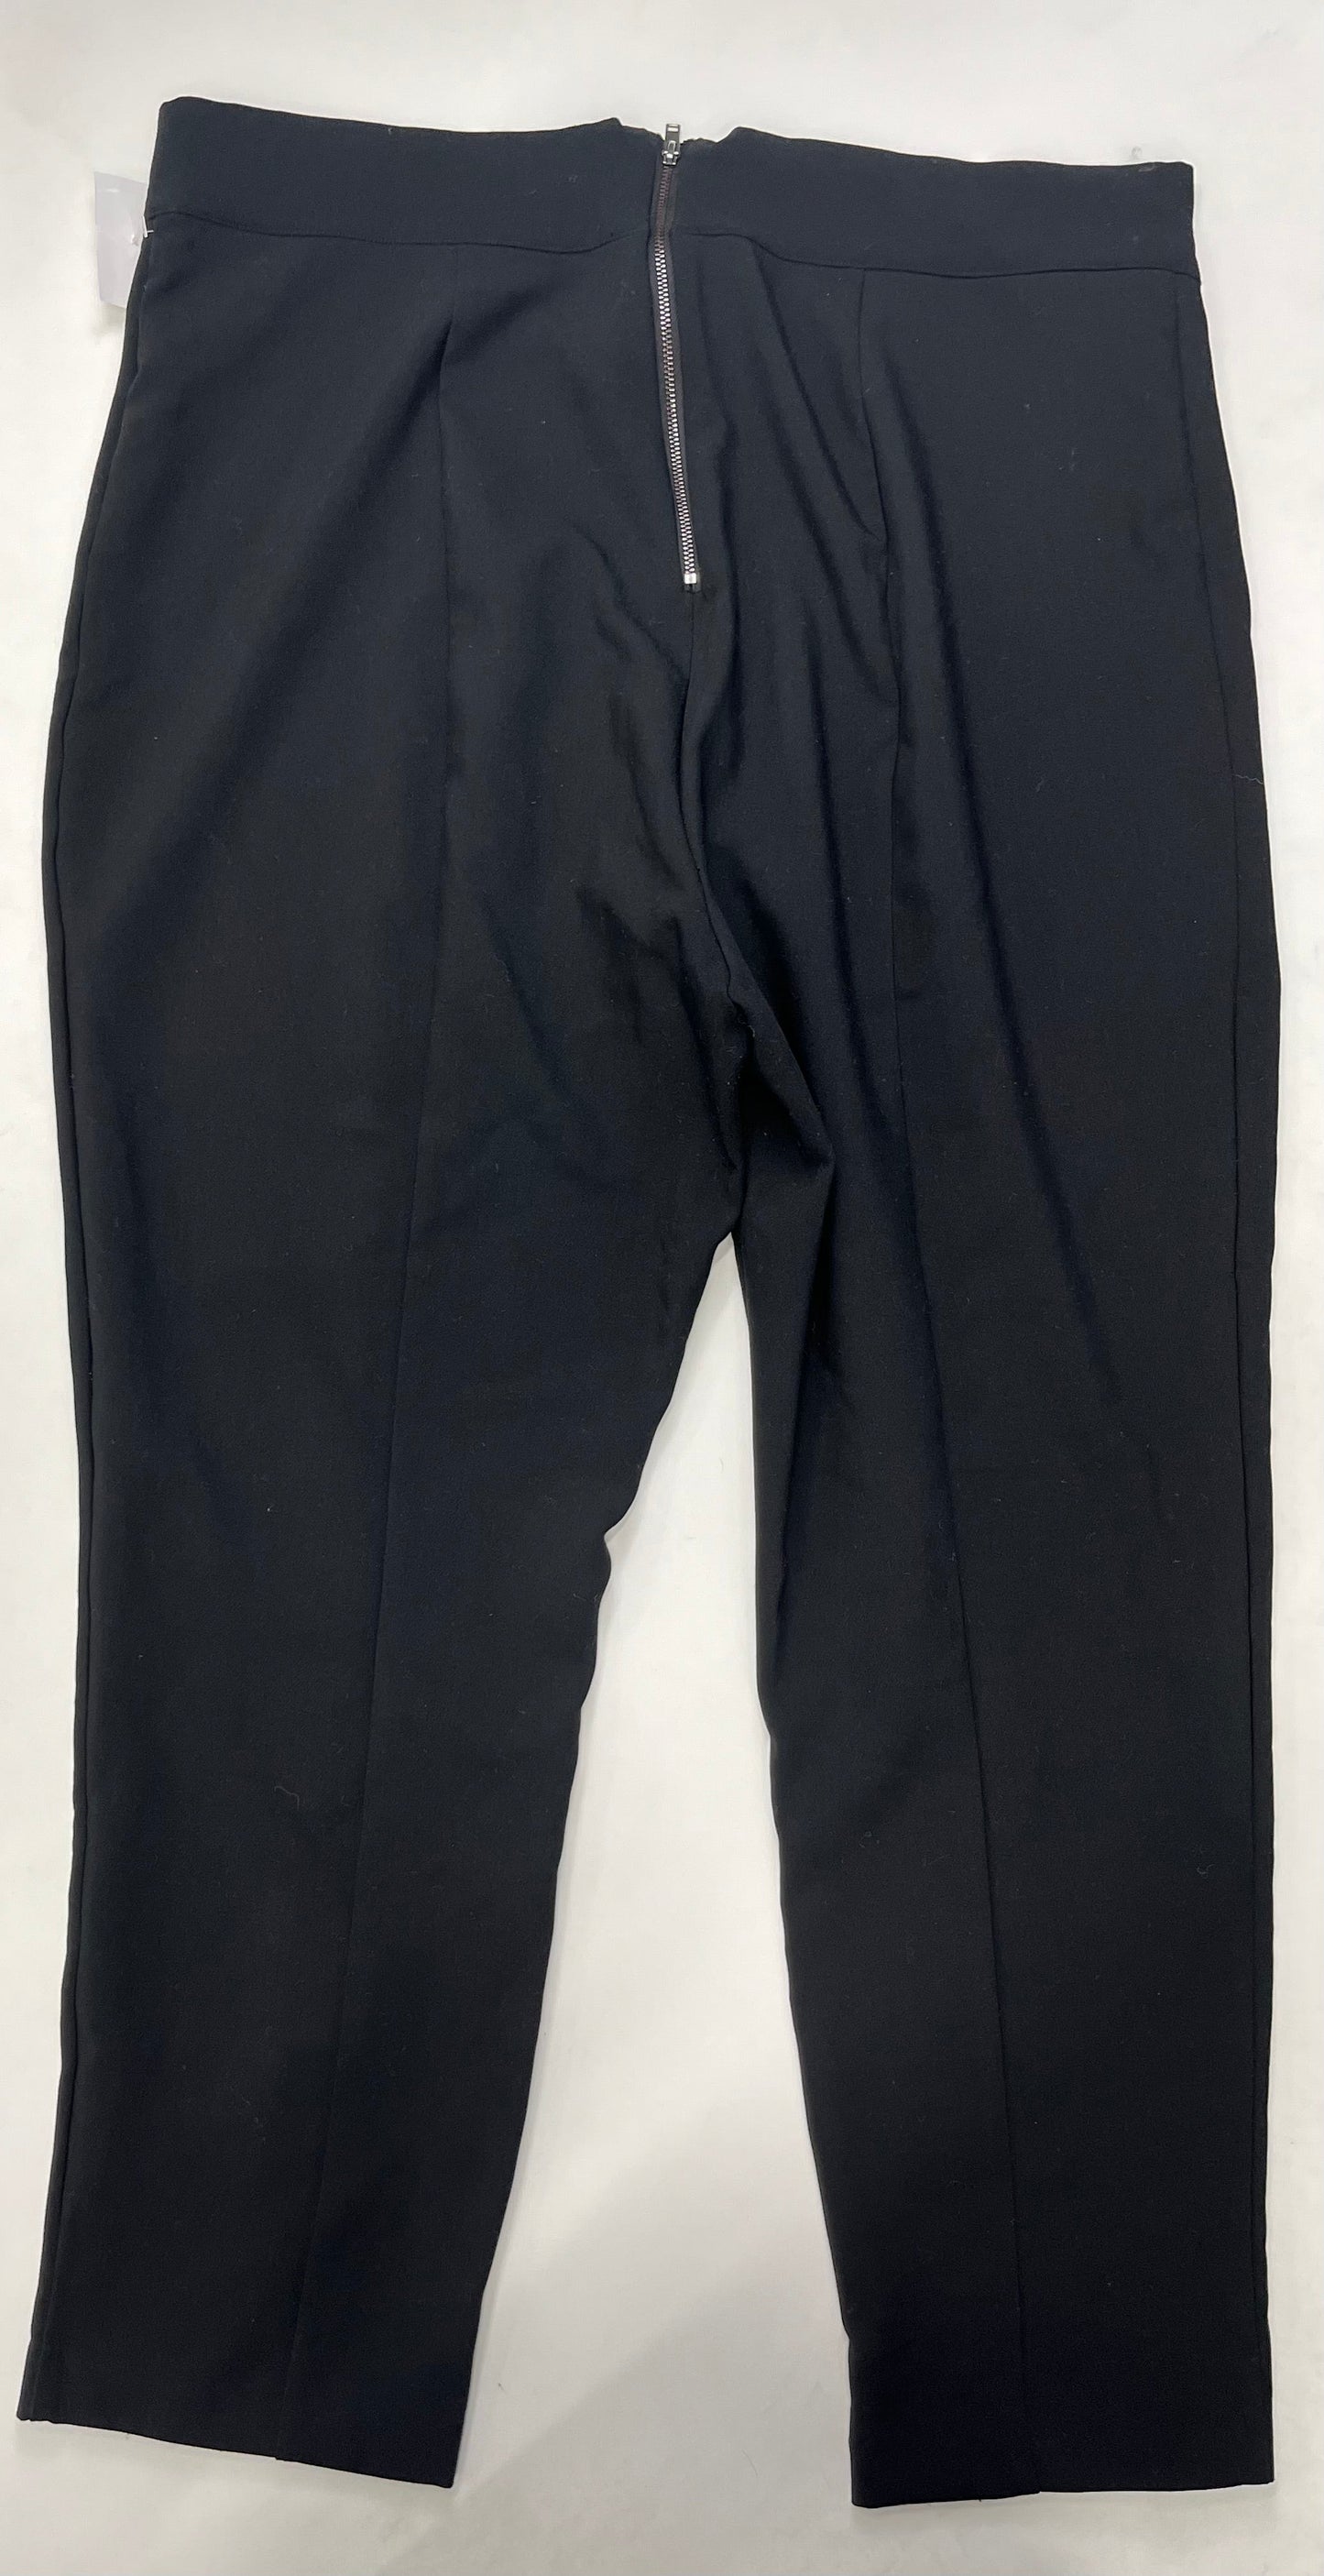 Black Pants Work/dress New York And Co, Size Xl